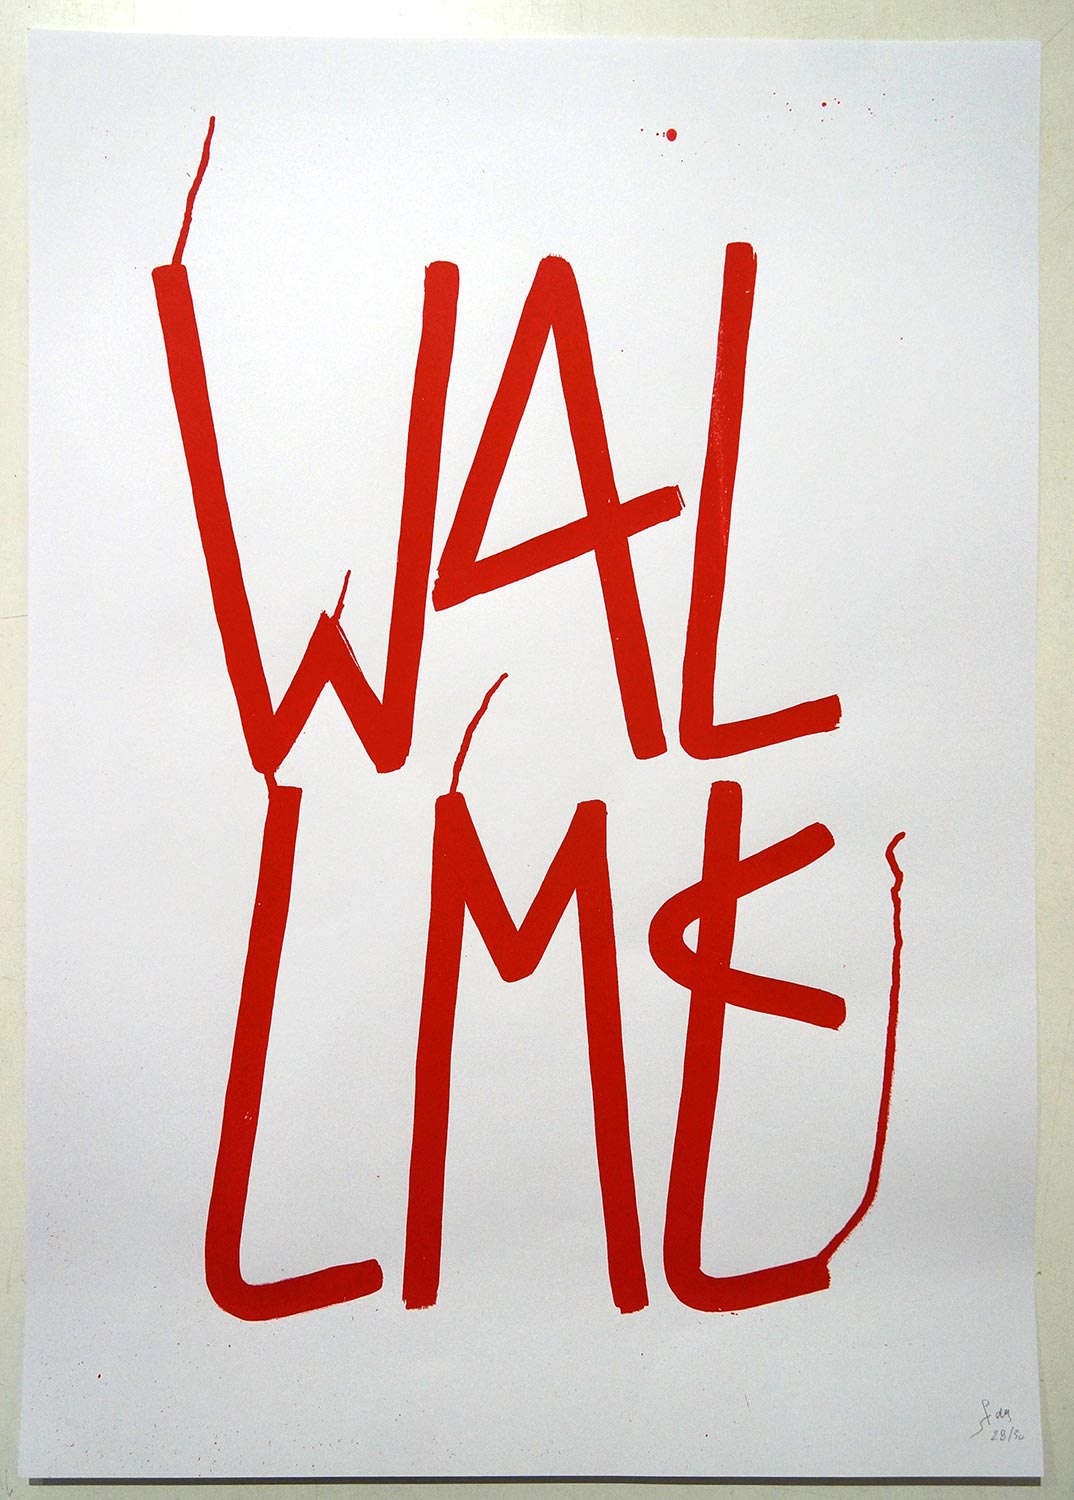 SP 38: "WALLME"  - in celebration of the 30 years fall of the Berlin Wall.